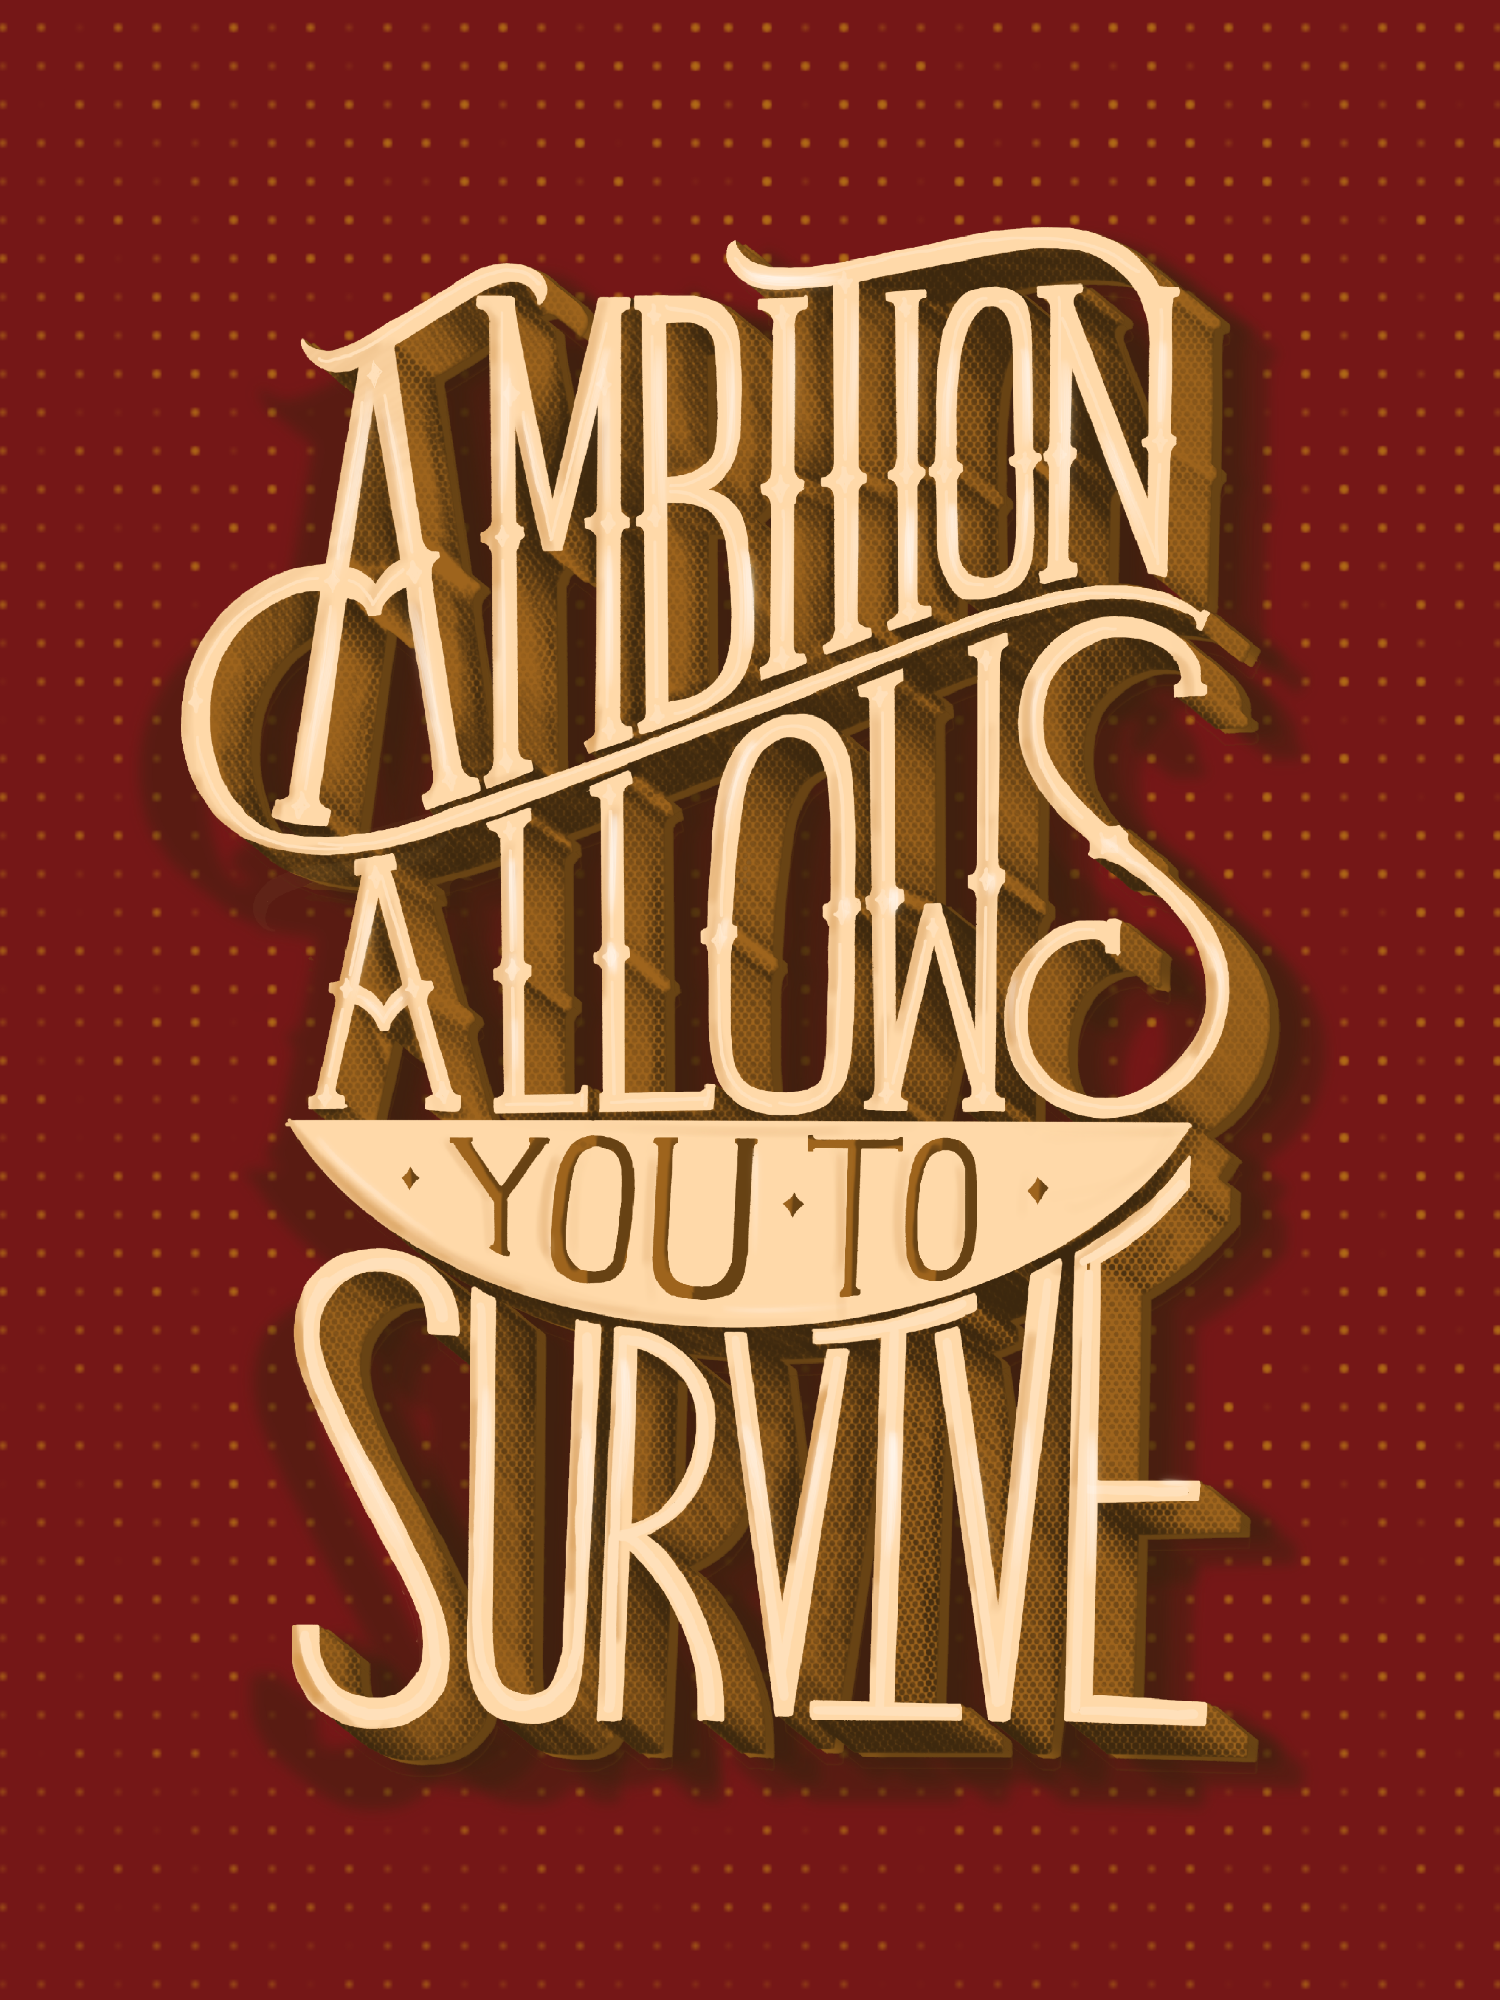 Ambition allows you to survive